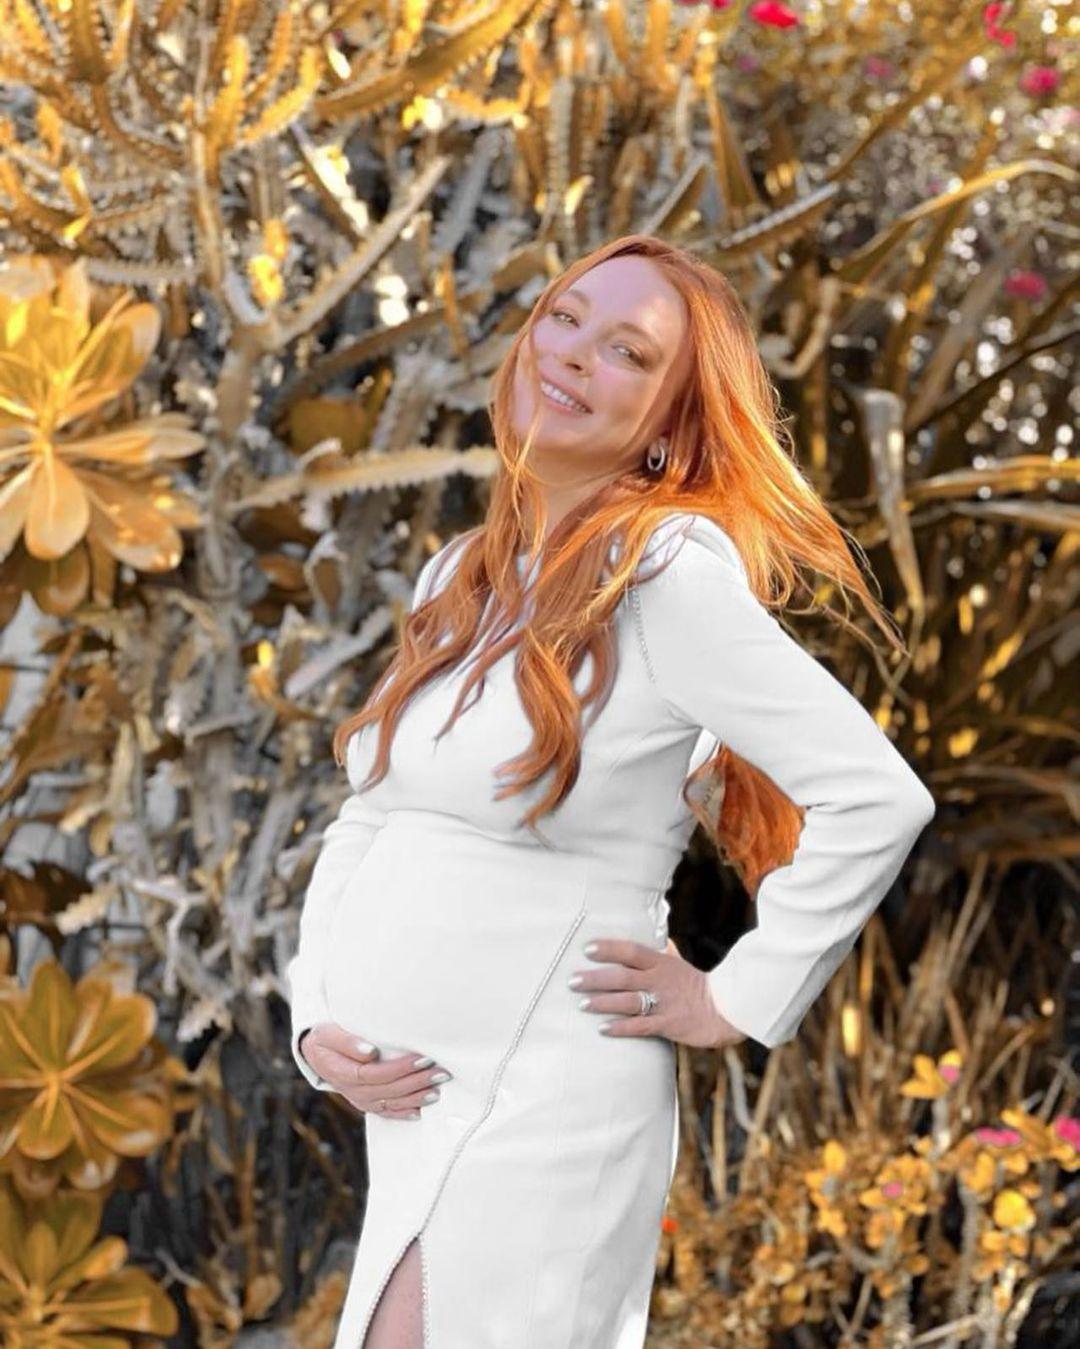 Lindsay Lohan's Baby Bump Is Everything! Pics Inside